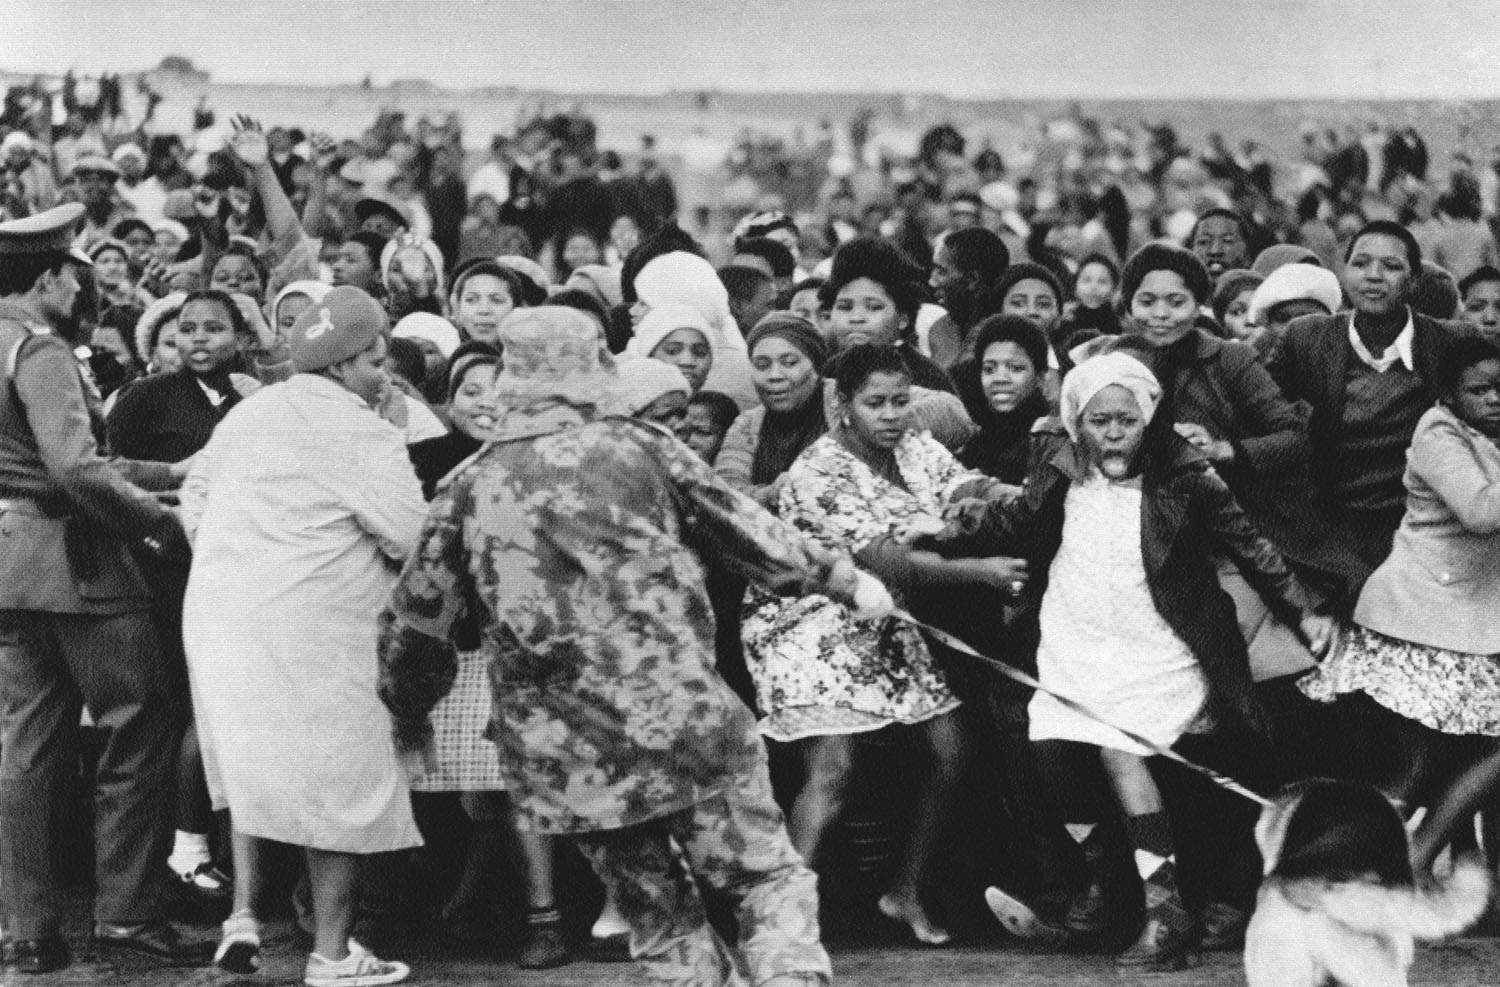 Military members starting to use attack dogs on a crowd in order to disperse them during the Riots in Cape Town, South Africa in 1976.